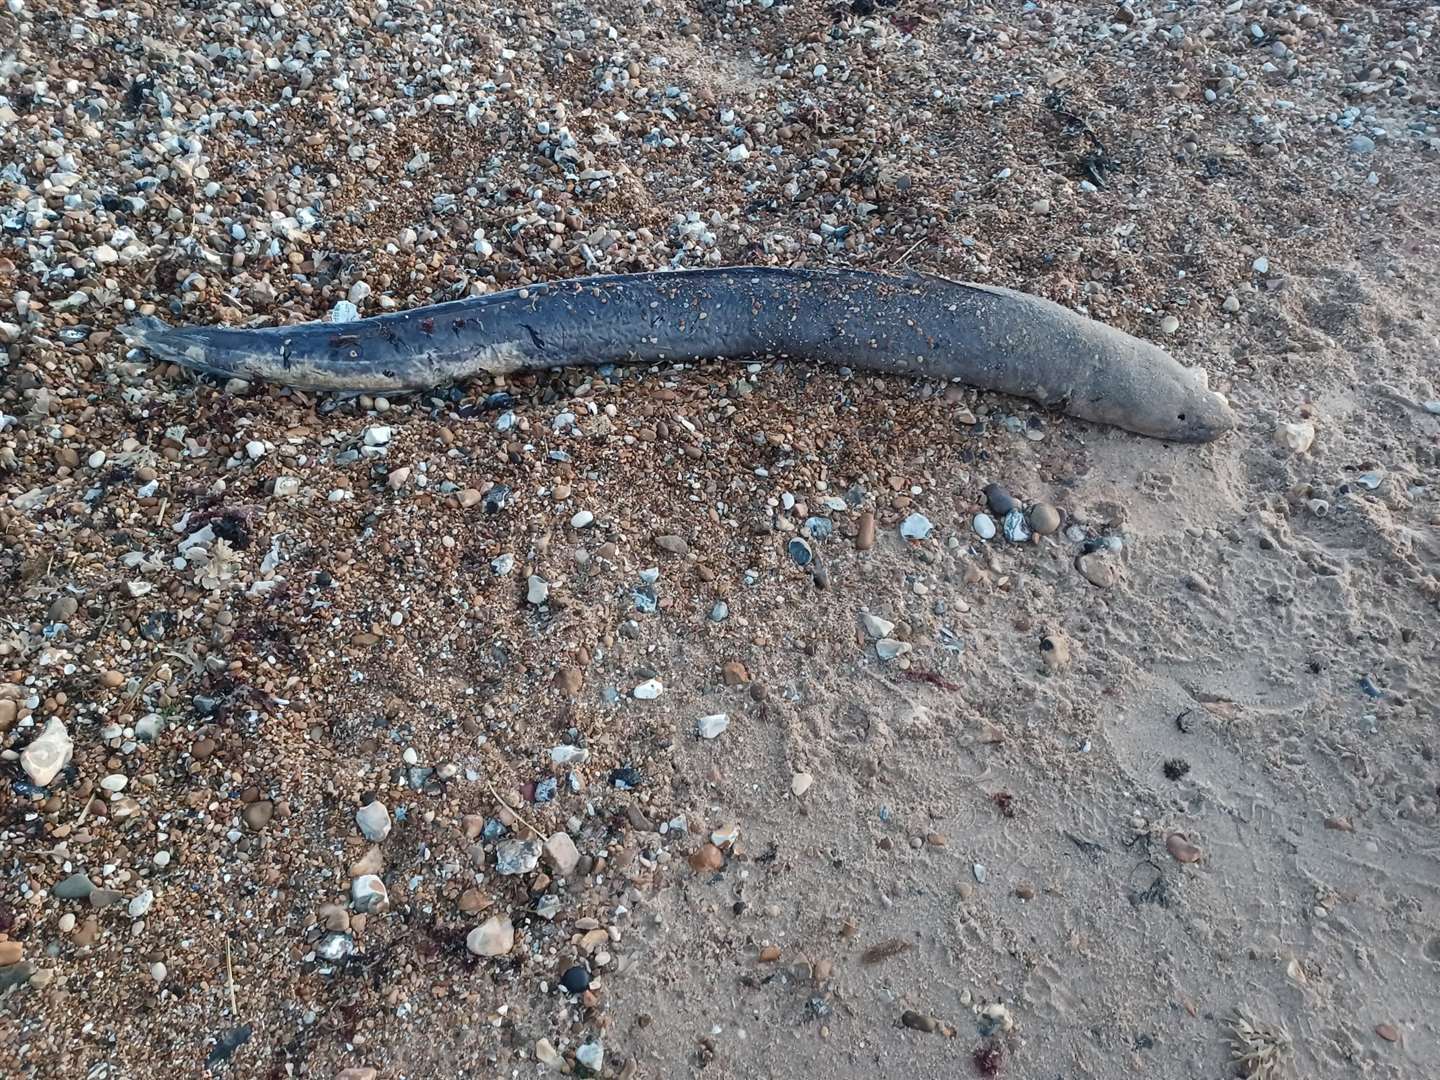 The conger eel was found washed up on Whitstable beach